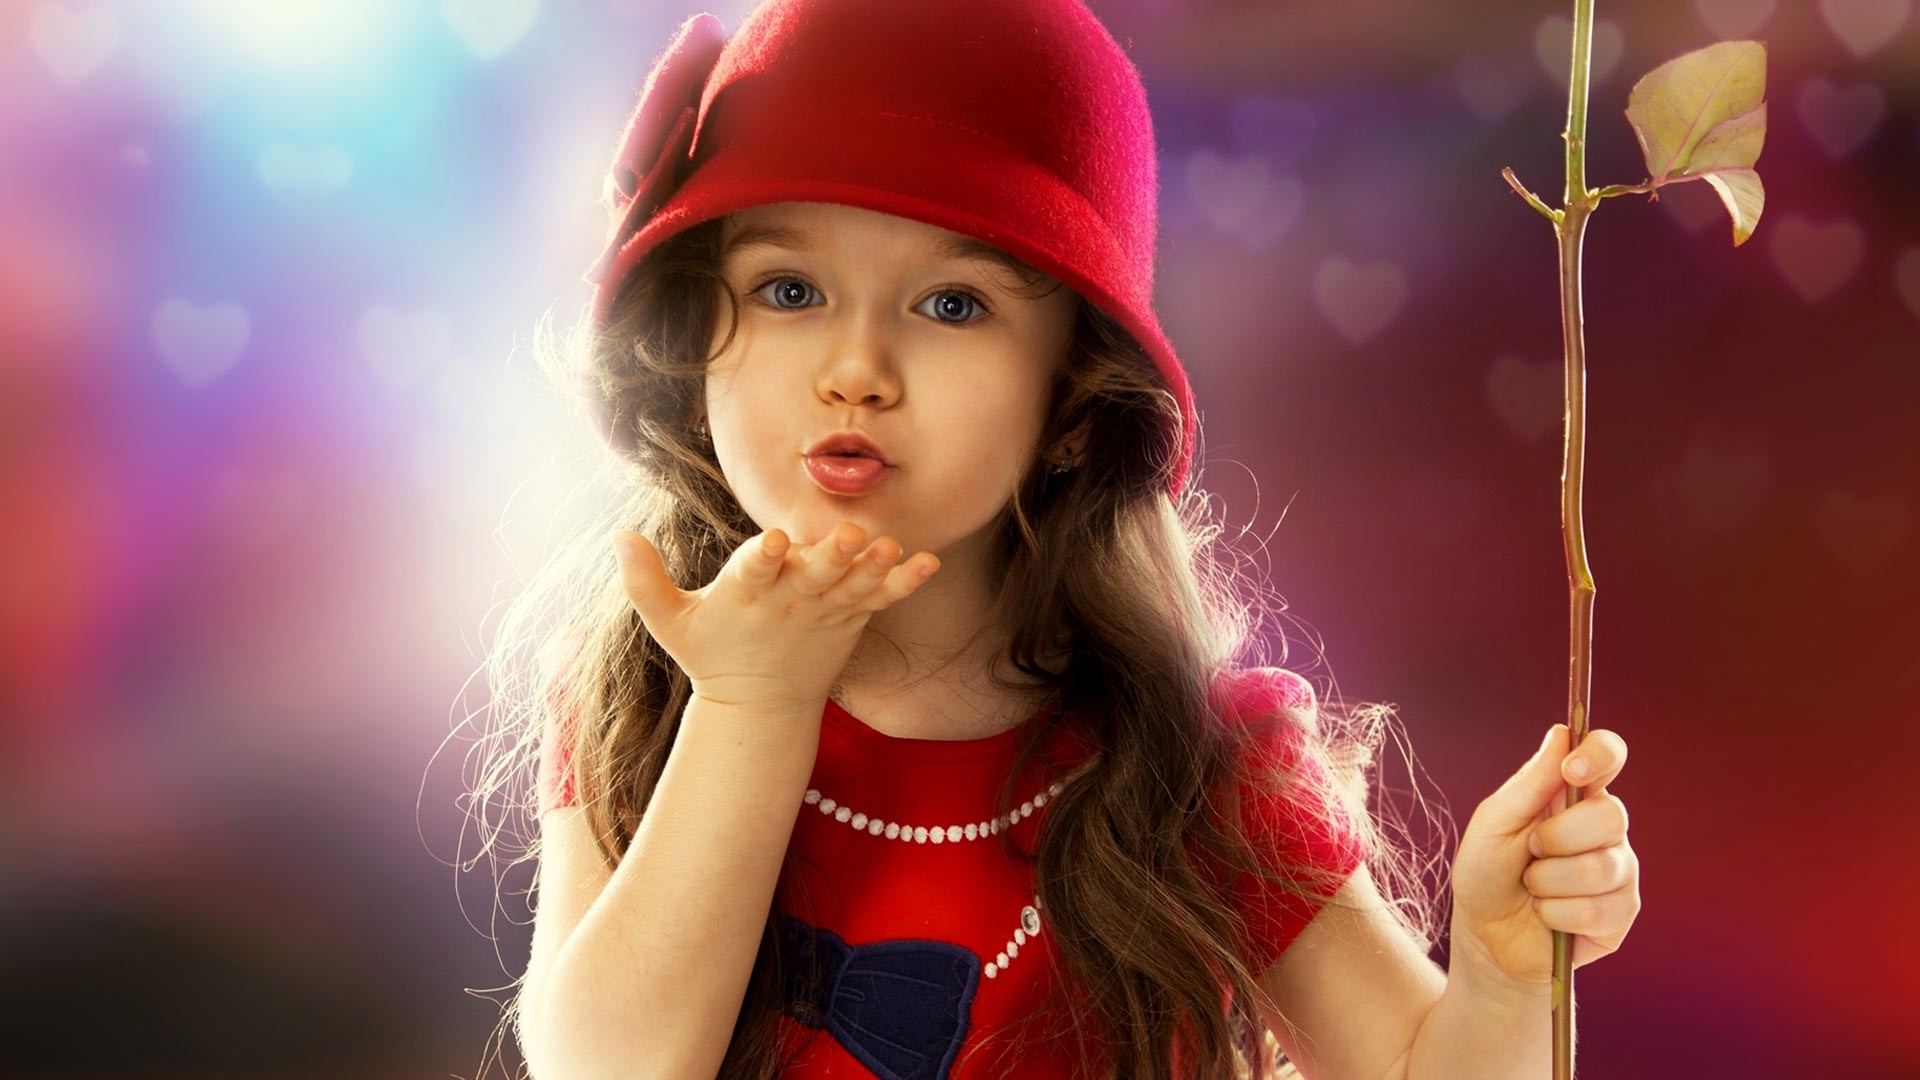 baby hd wallpapers 1080p,red,pink,lip,child,beauty